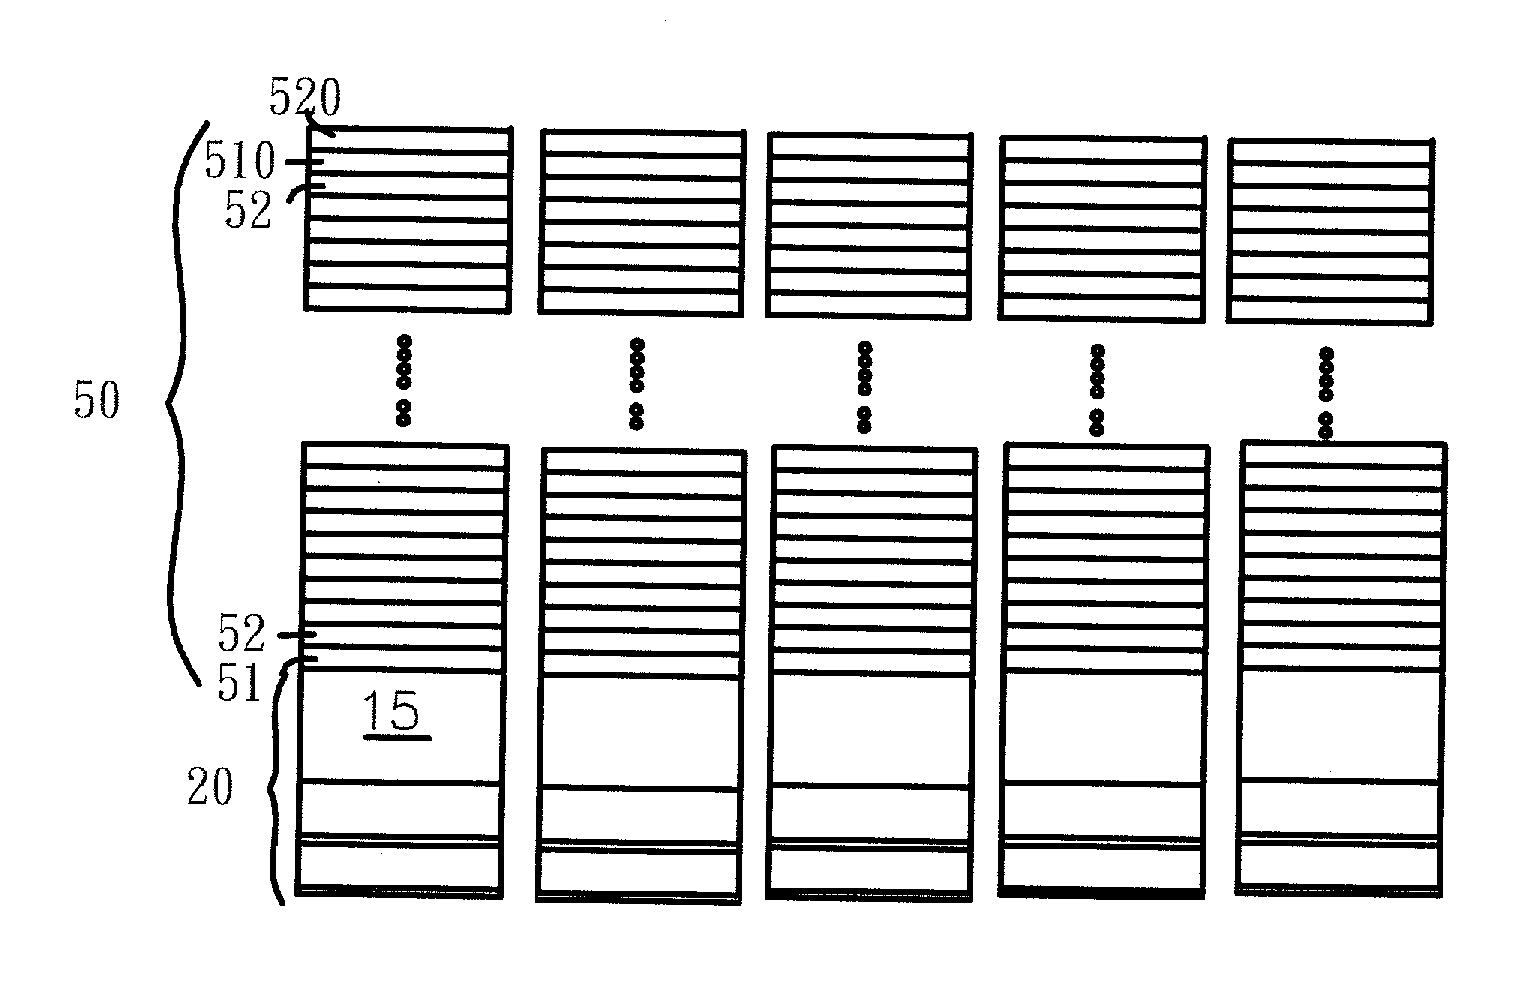 Method of Wafer Level Purifying Light Color Emitting from a Light Emitting Semiconductor Wafer